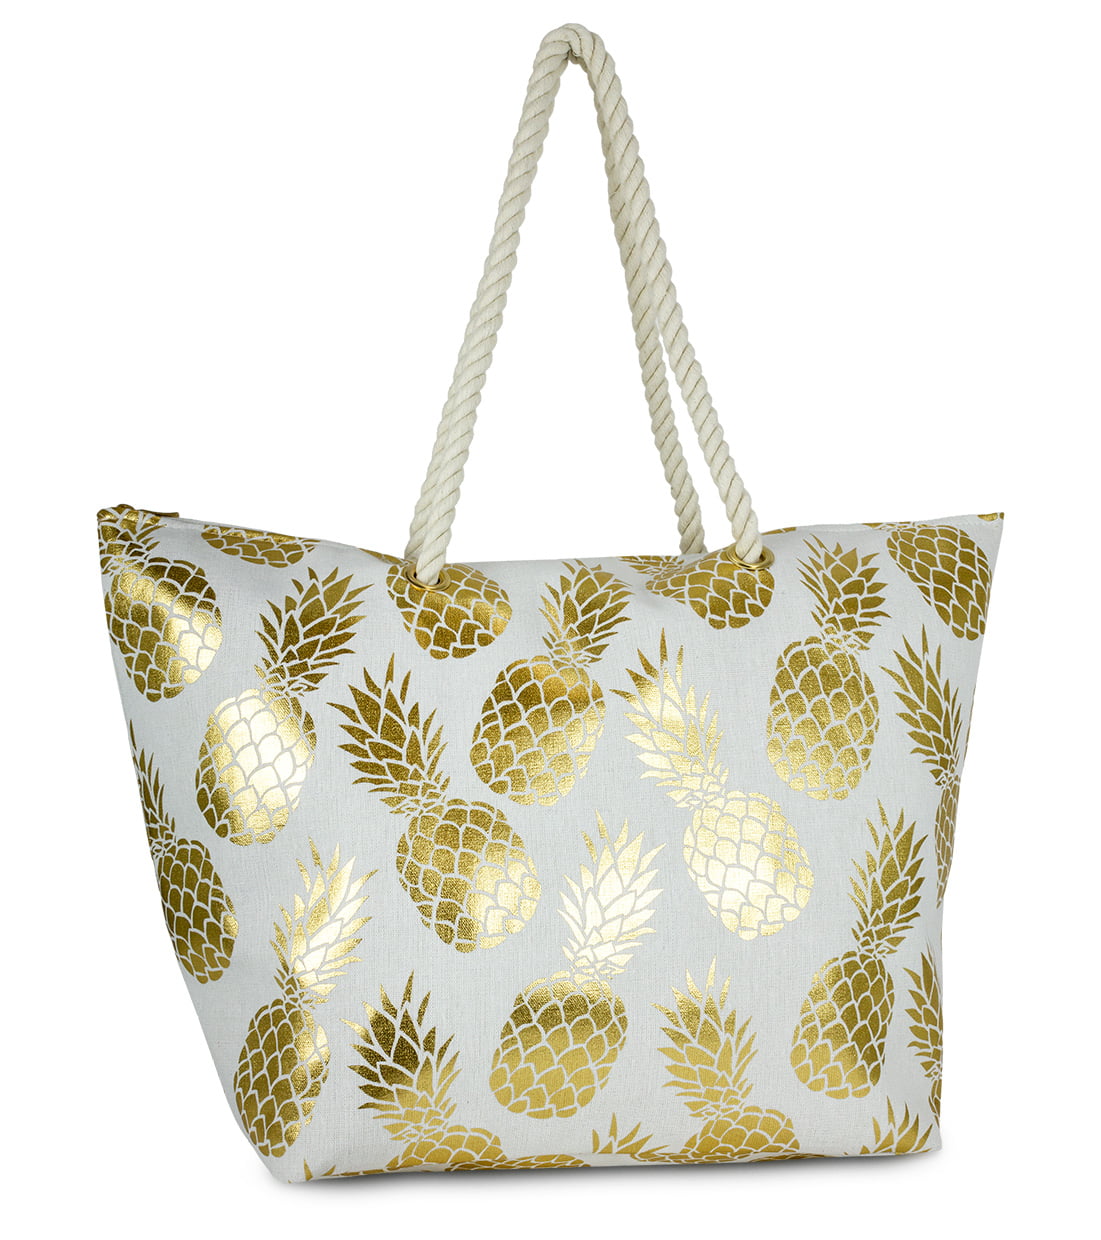 Front Pineapples and Coconuts Classic Tote Purse w/Leather Trim Personalized